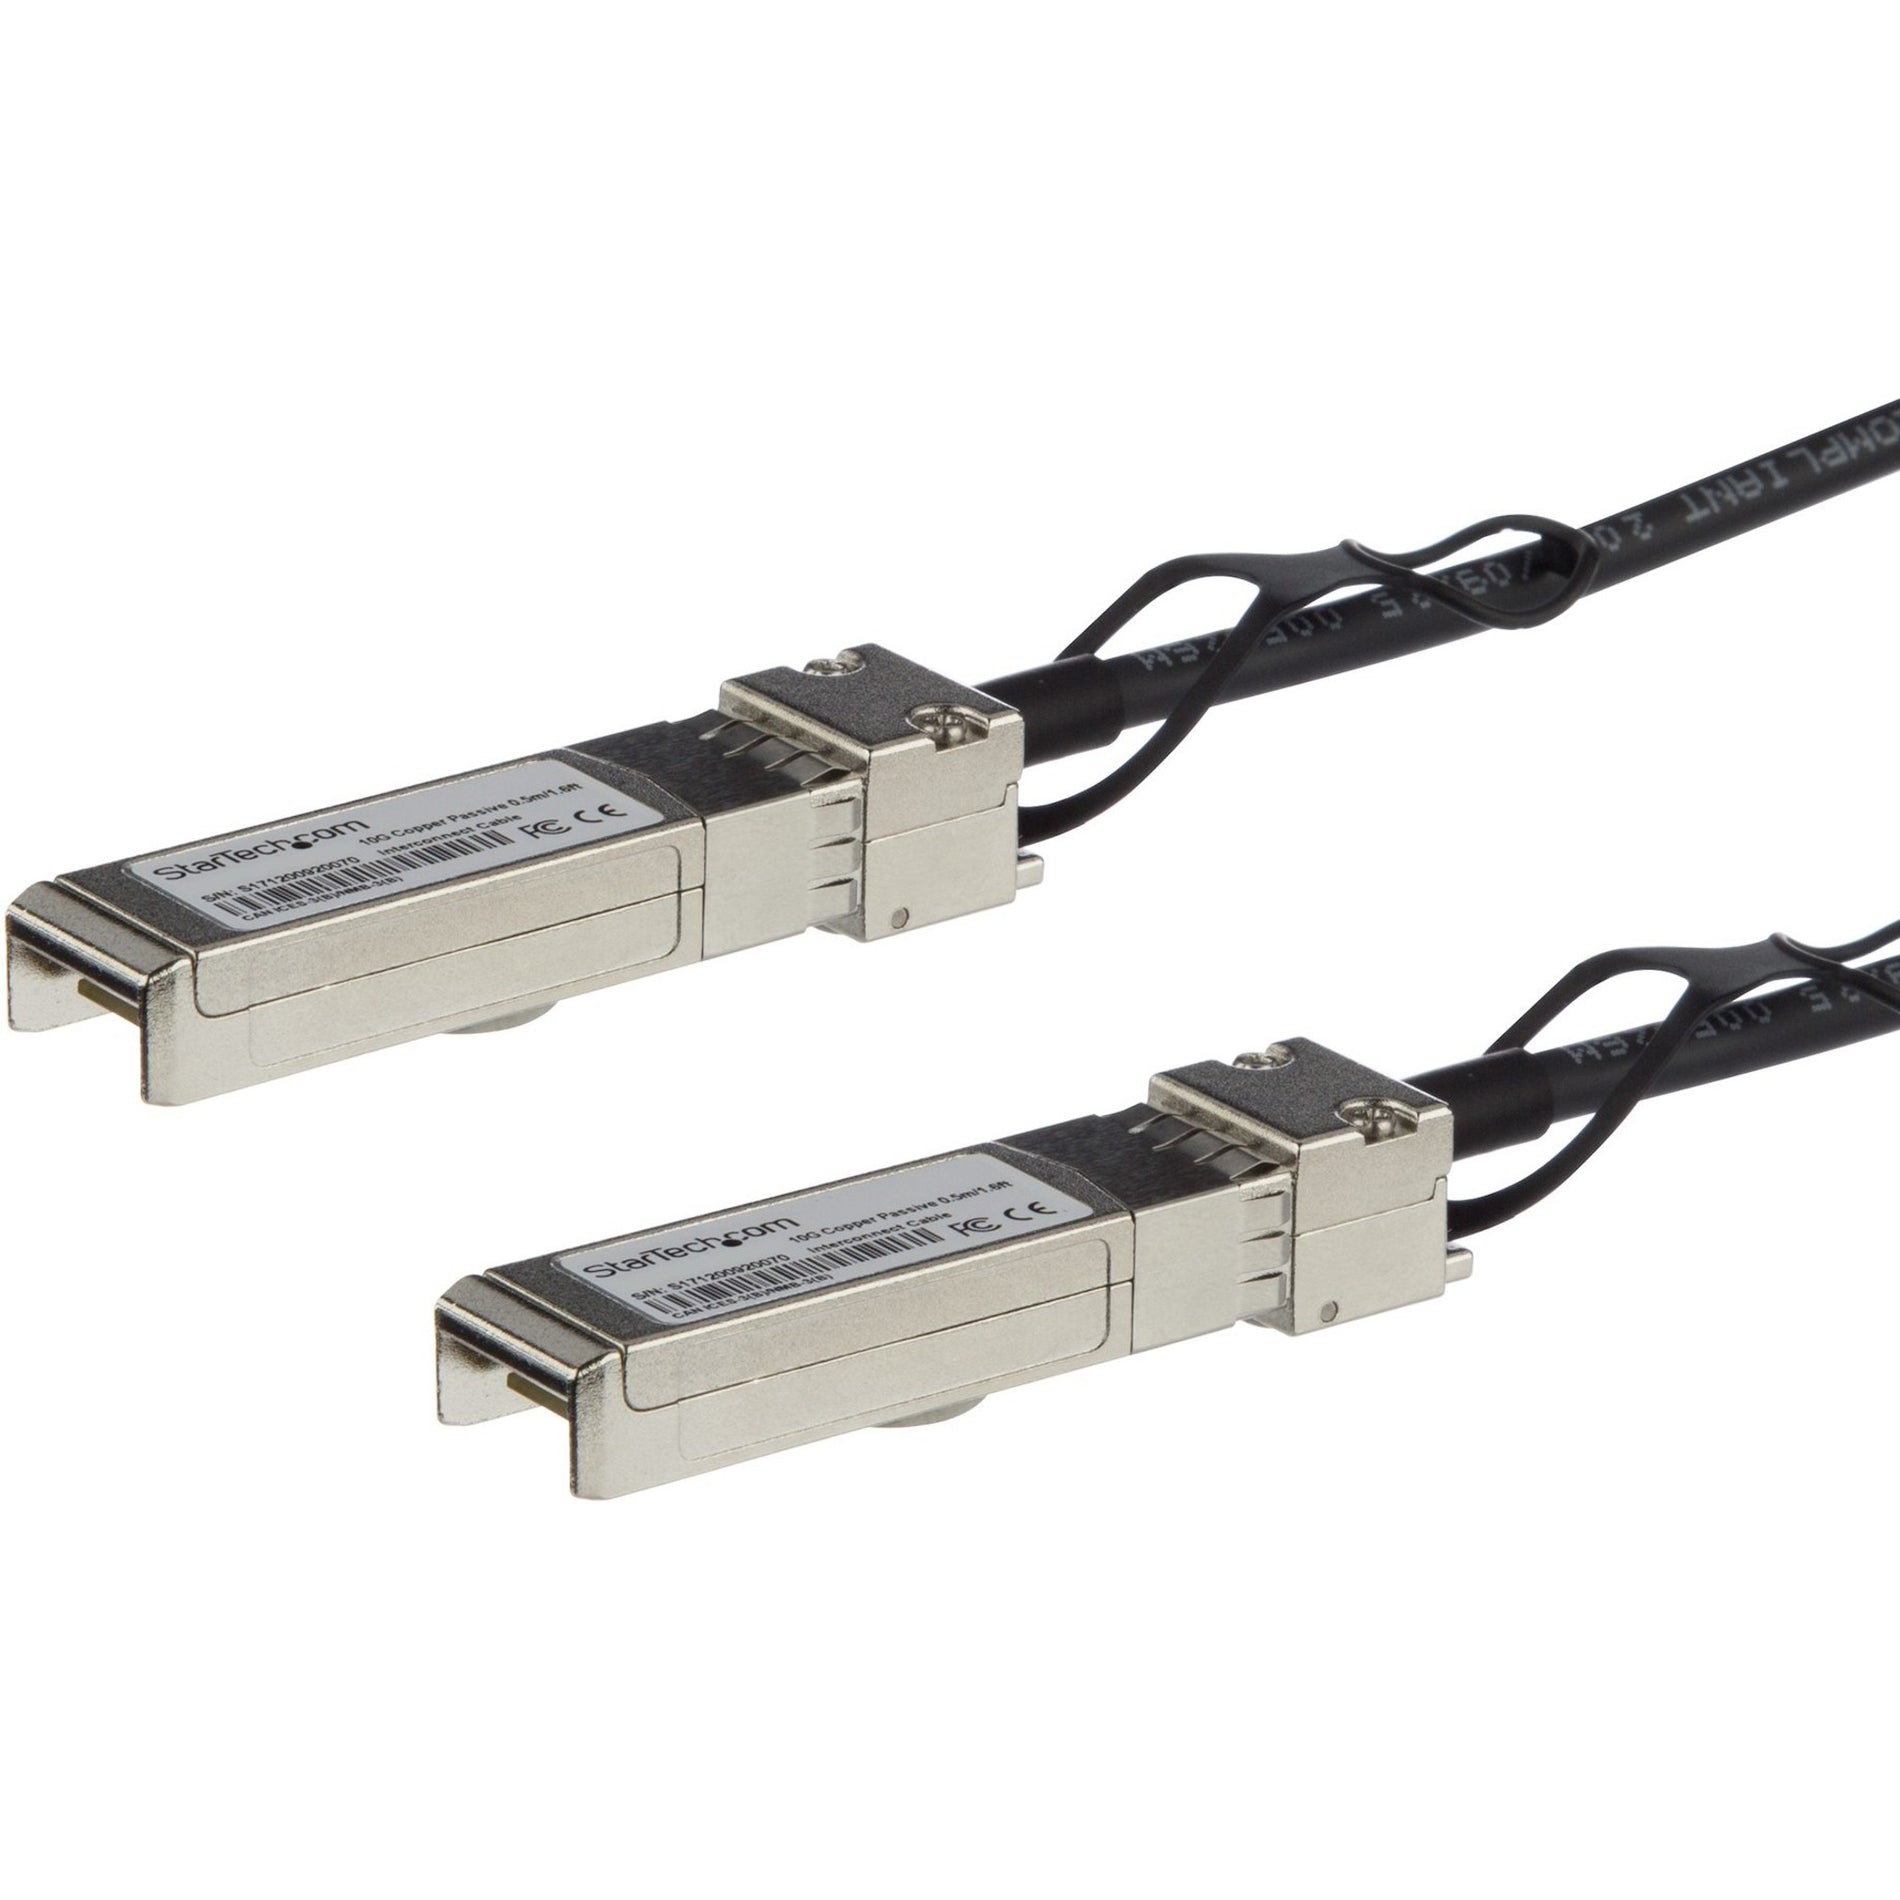 StarTech.com SFP10GPC2M SFP+ Direct Attach Cable - MSA Compliant - 2 m (6.6 ft.), Passive, Hot-swappable, 10 Gbit/s Data Transfer Rate, Twinaxial Network Cable